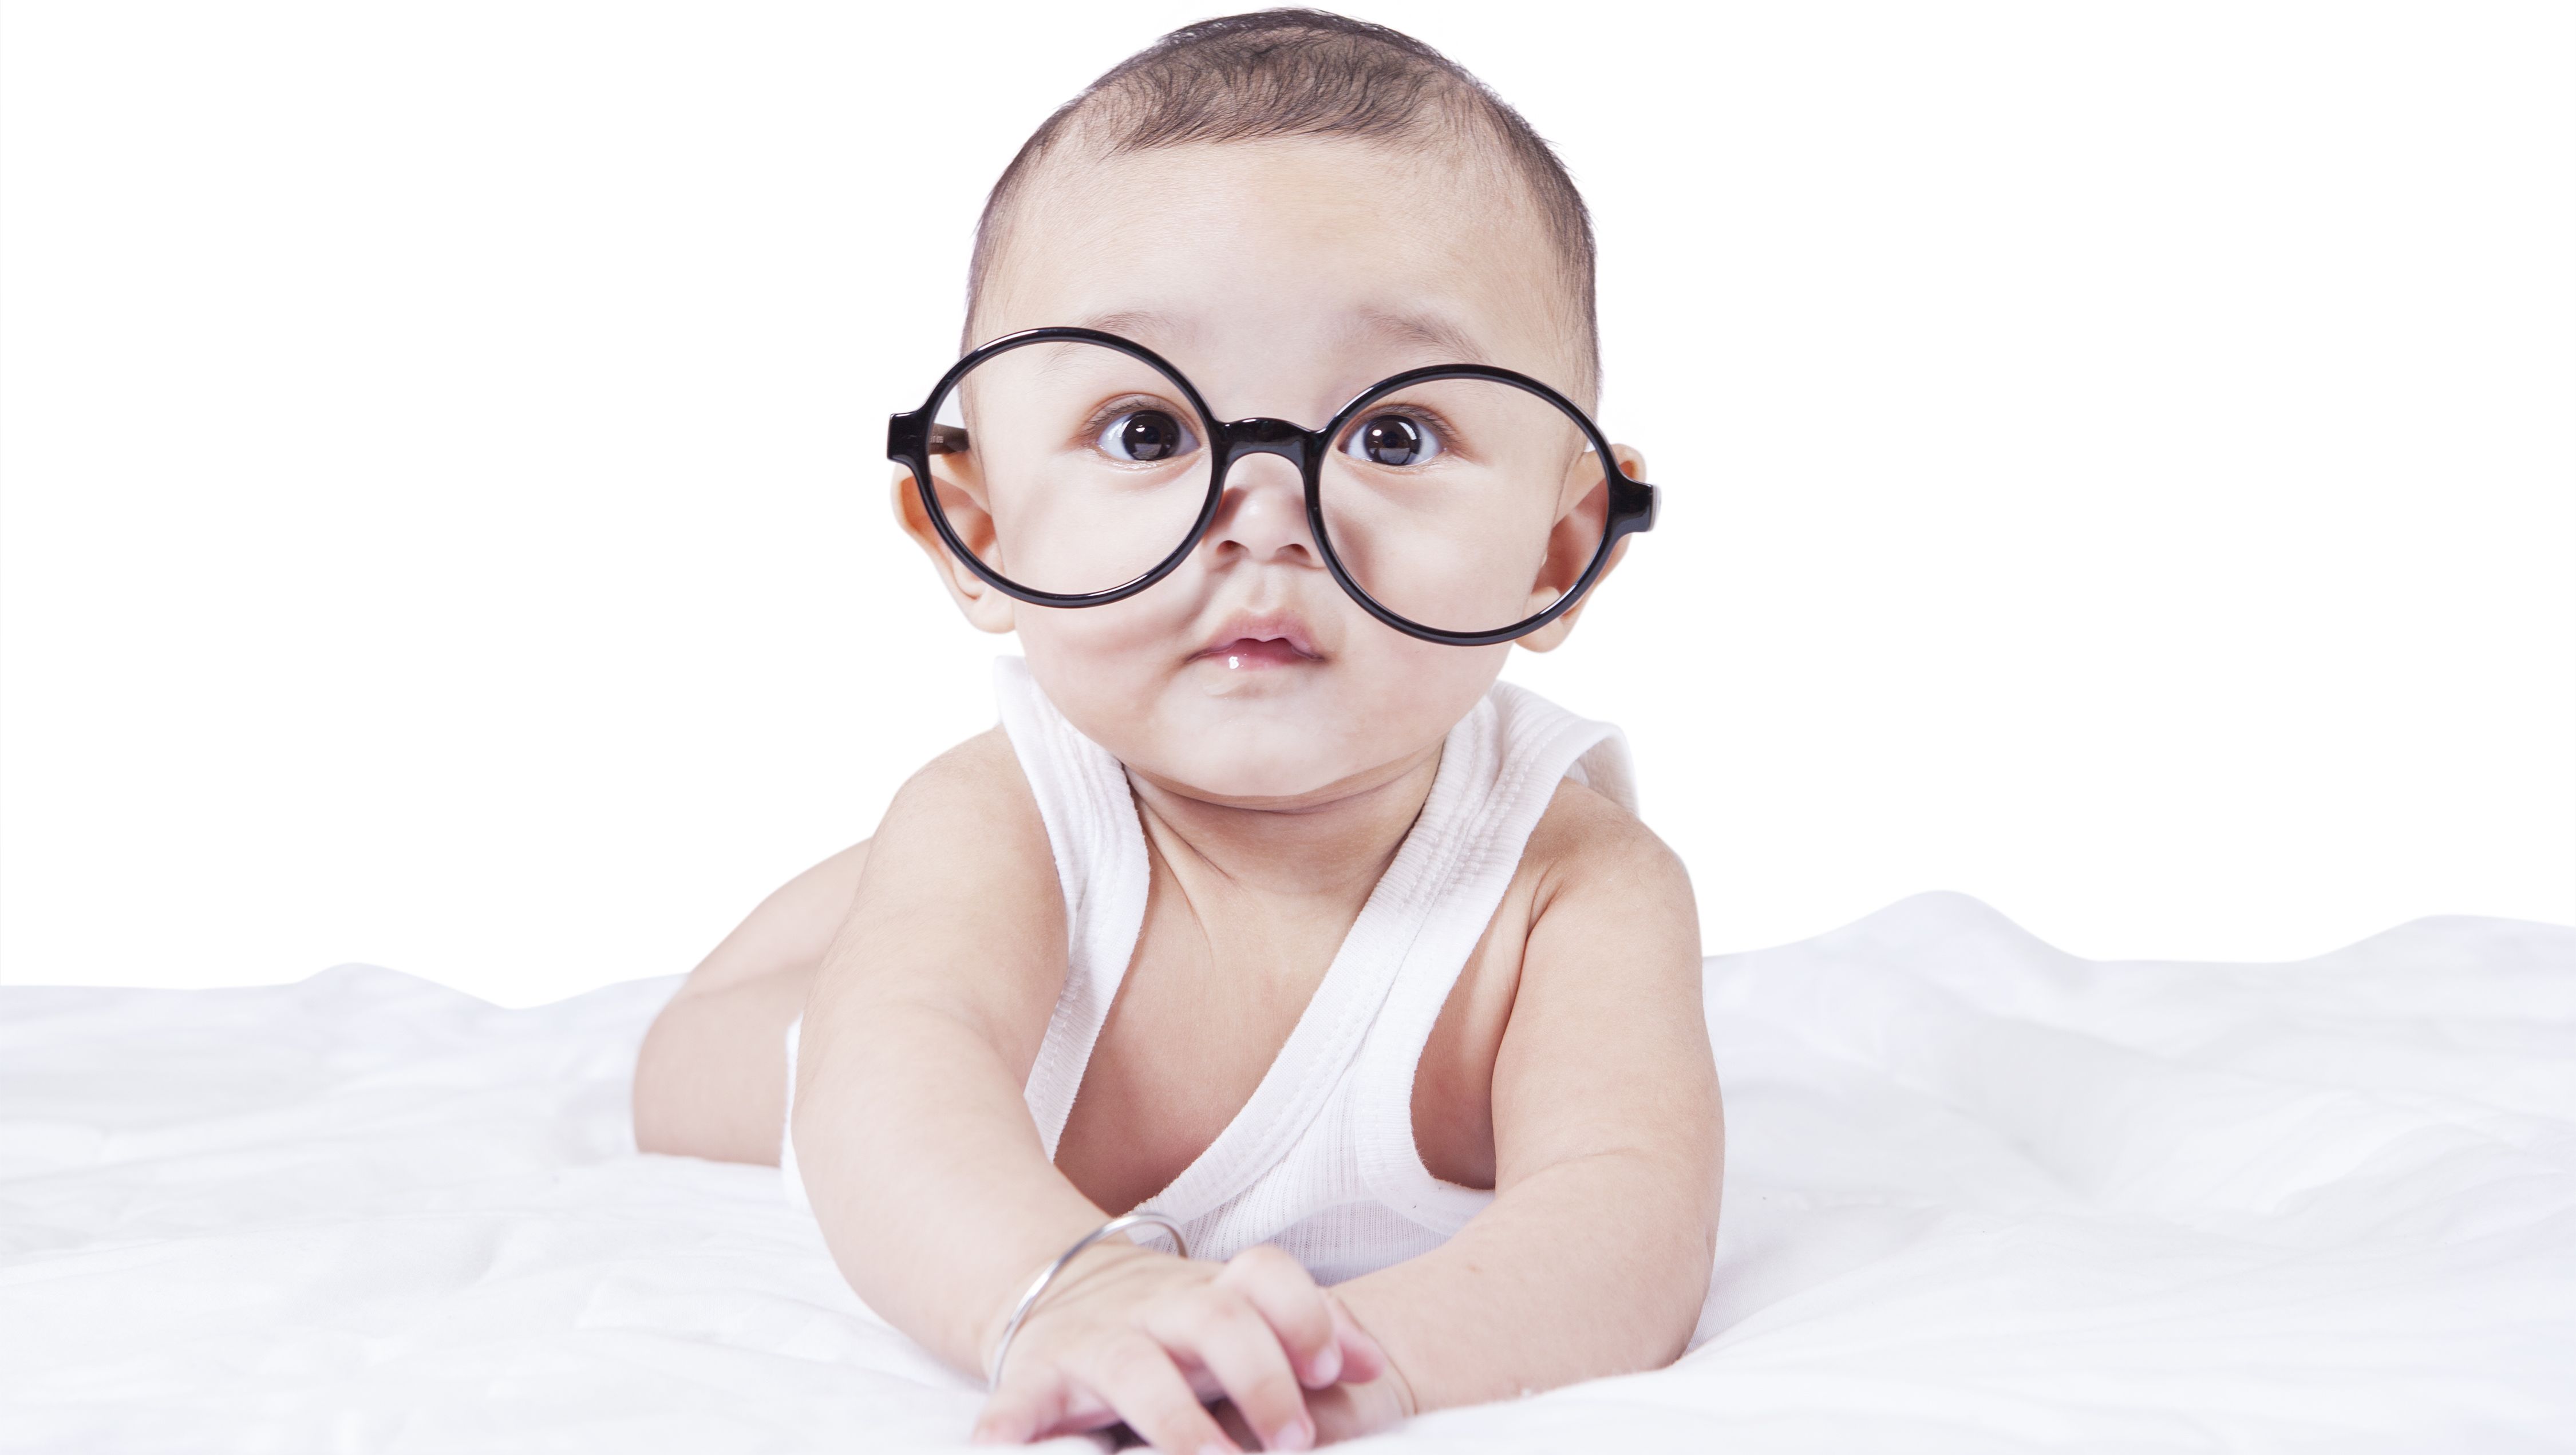 pediatric eye exams for infants: a baby wearing comically large glases